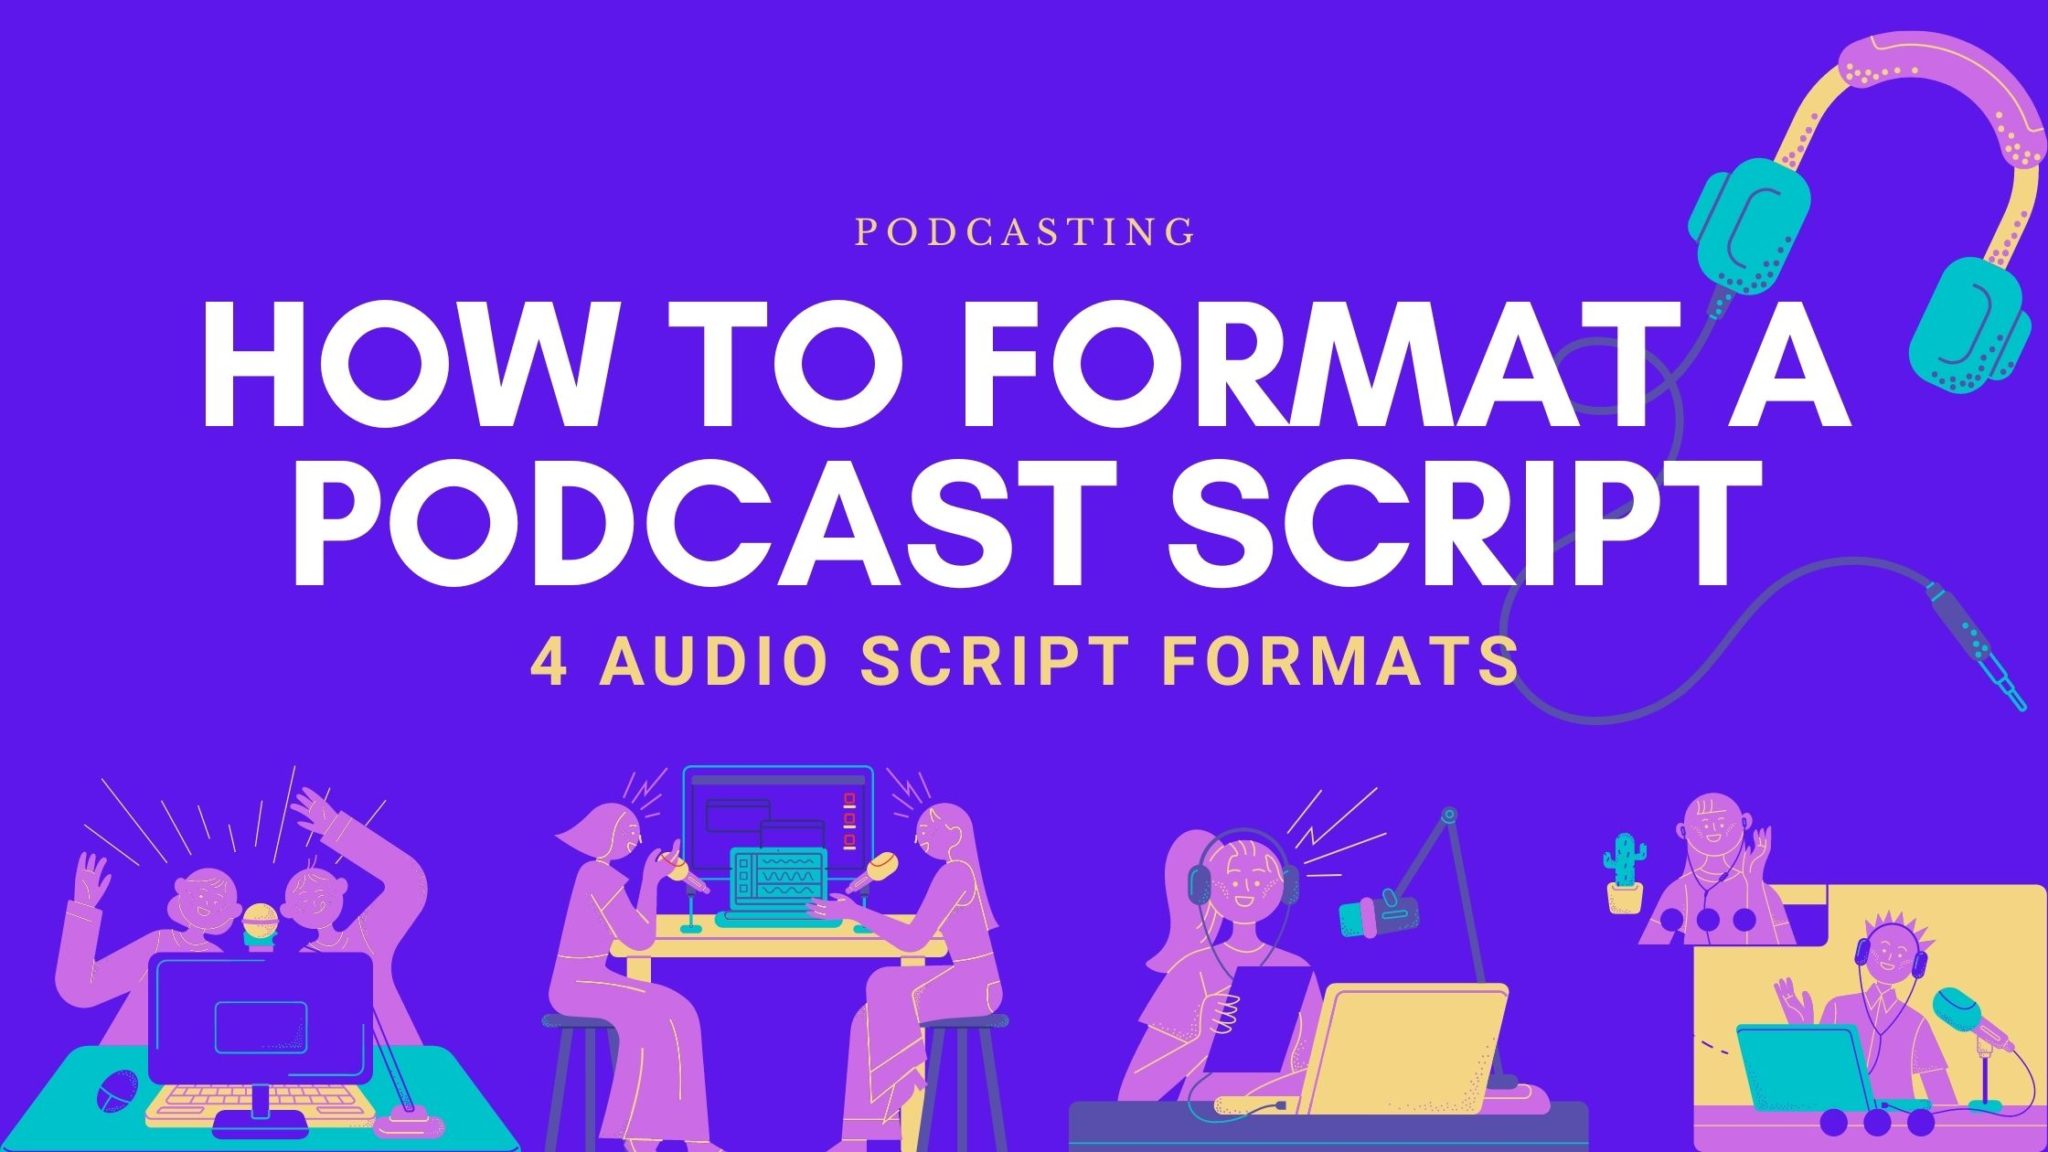 How to Write a Podcast: 28 Ways to Format a Podcast Script